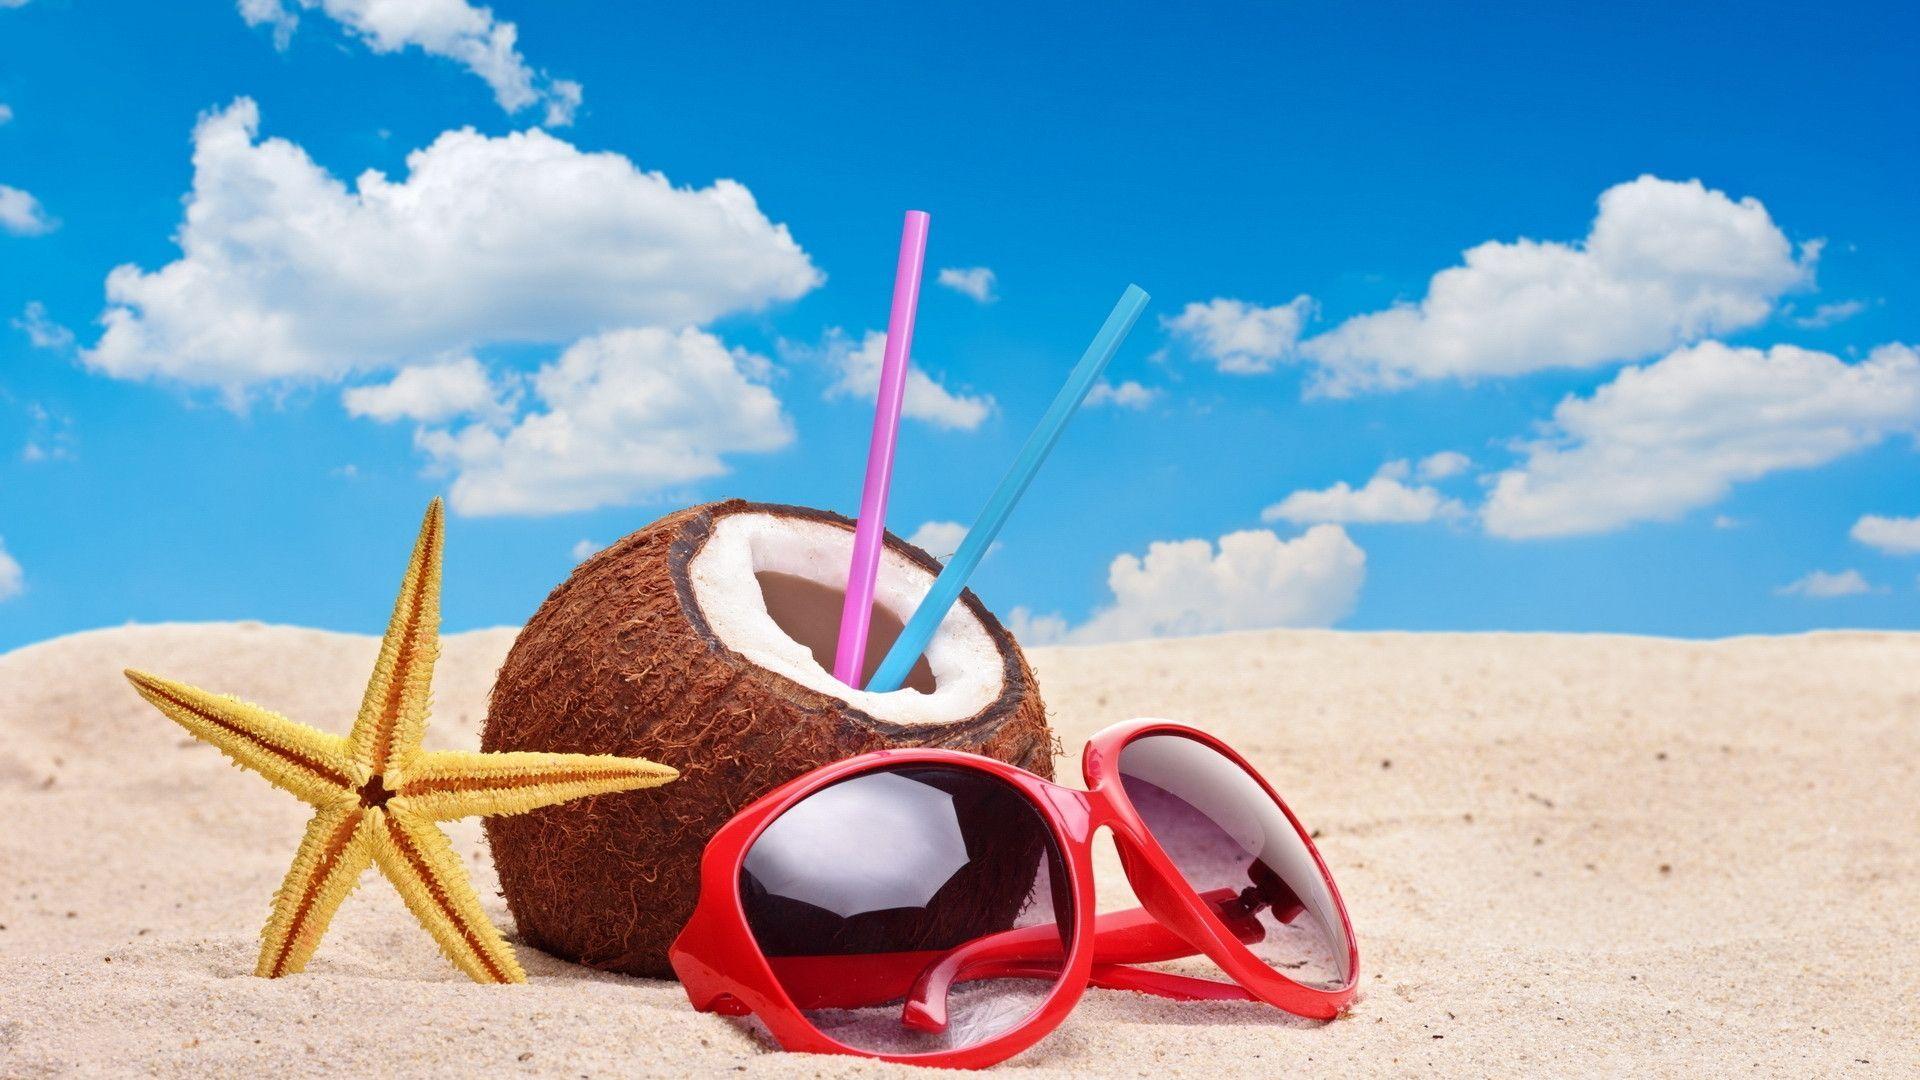 Summer Wallpaper Background 2014 HD Cool 7 HD Wallpaper. Hdimges